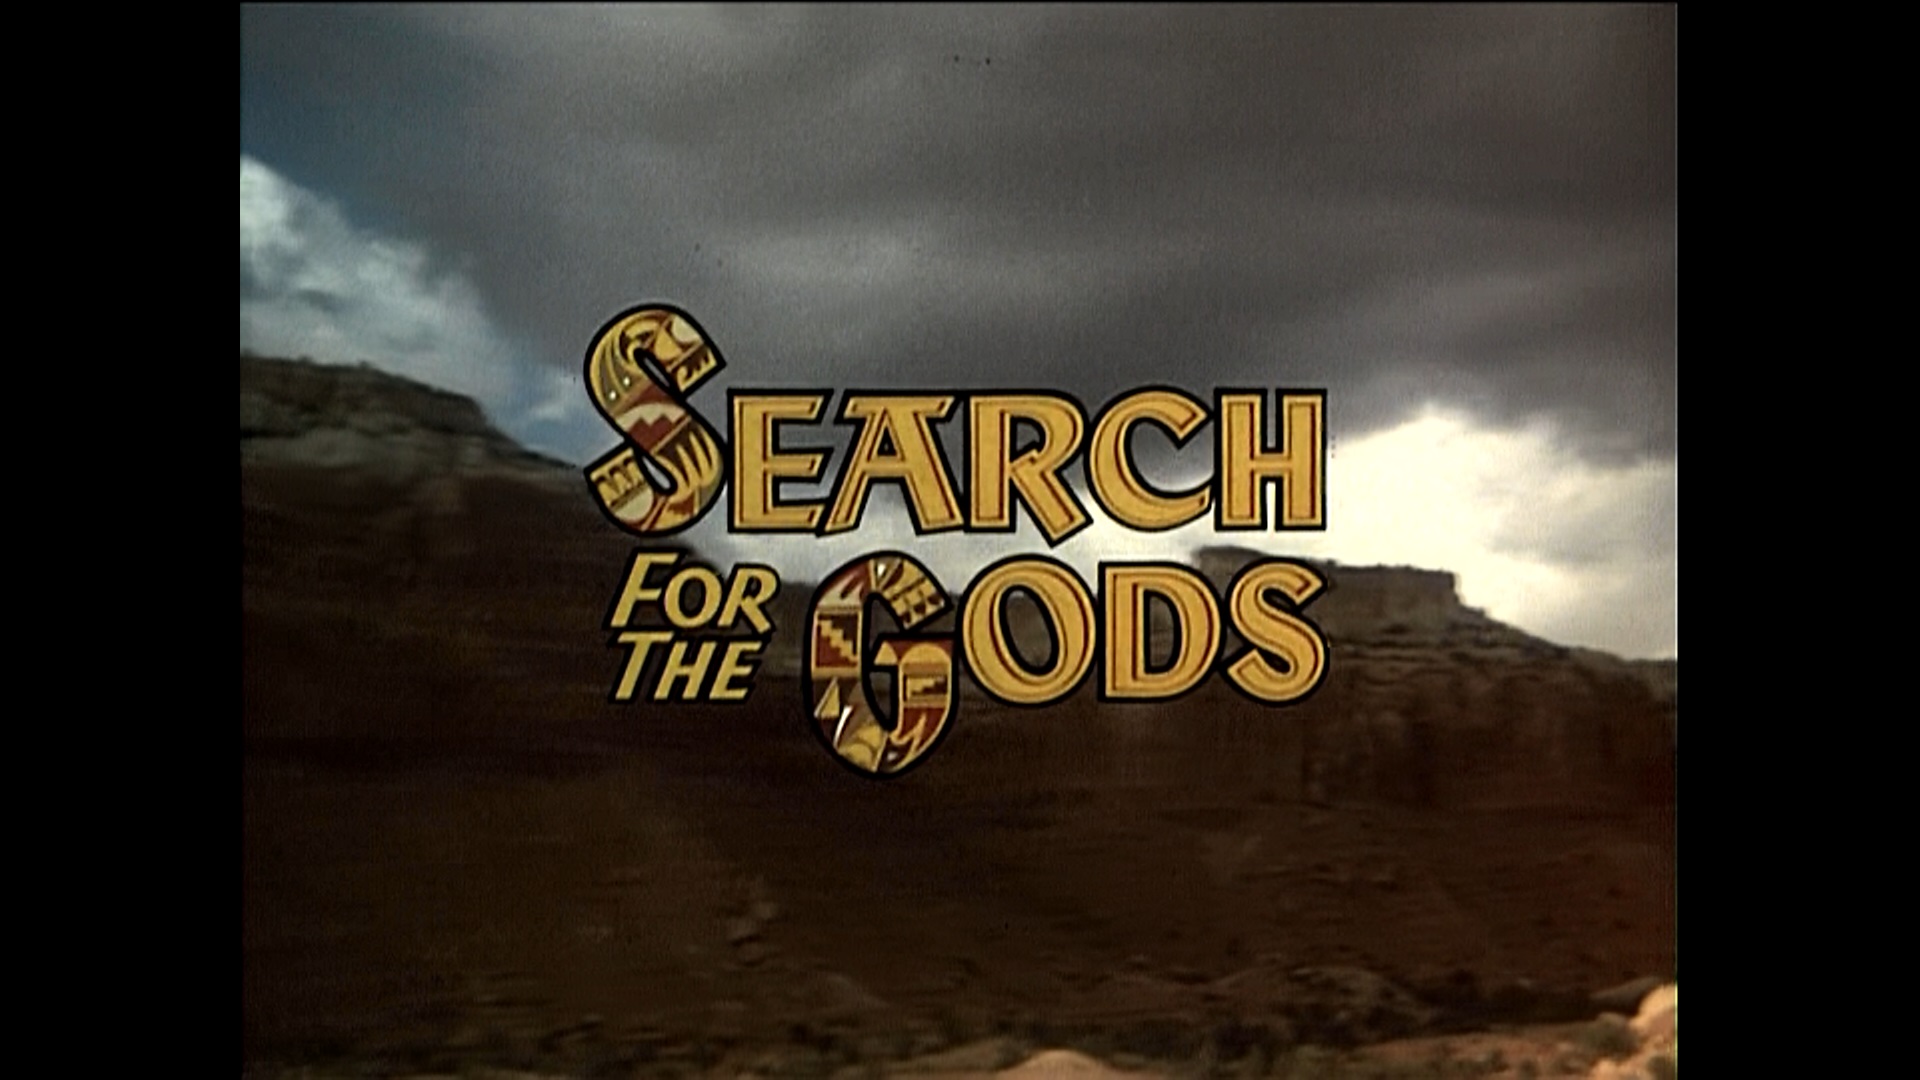 Search for the Gods (1975) Screenshot 1 